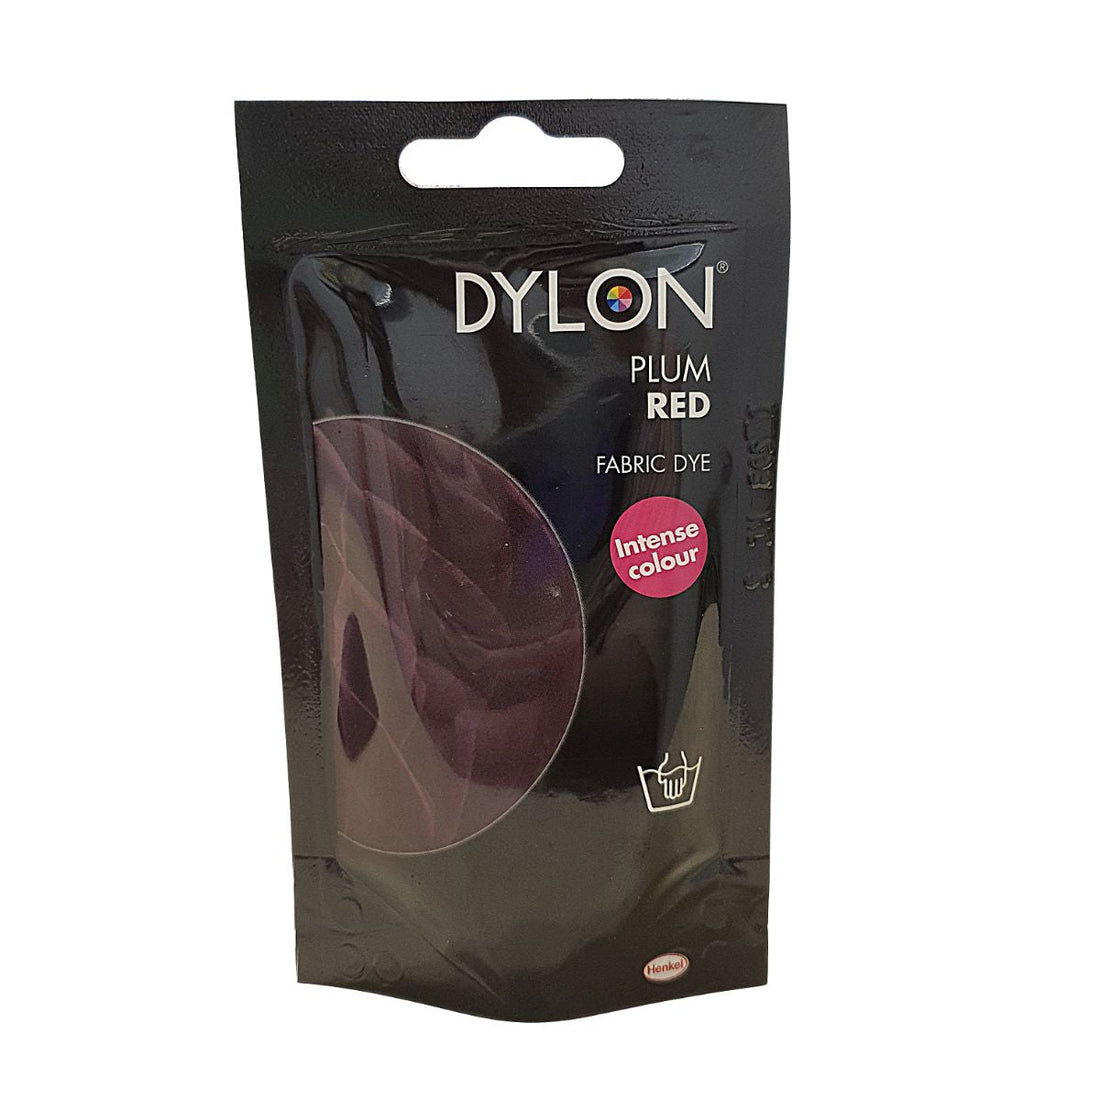 dylon hand dye for fabric plum red